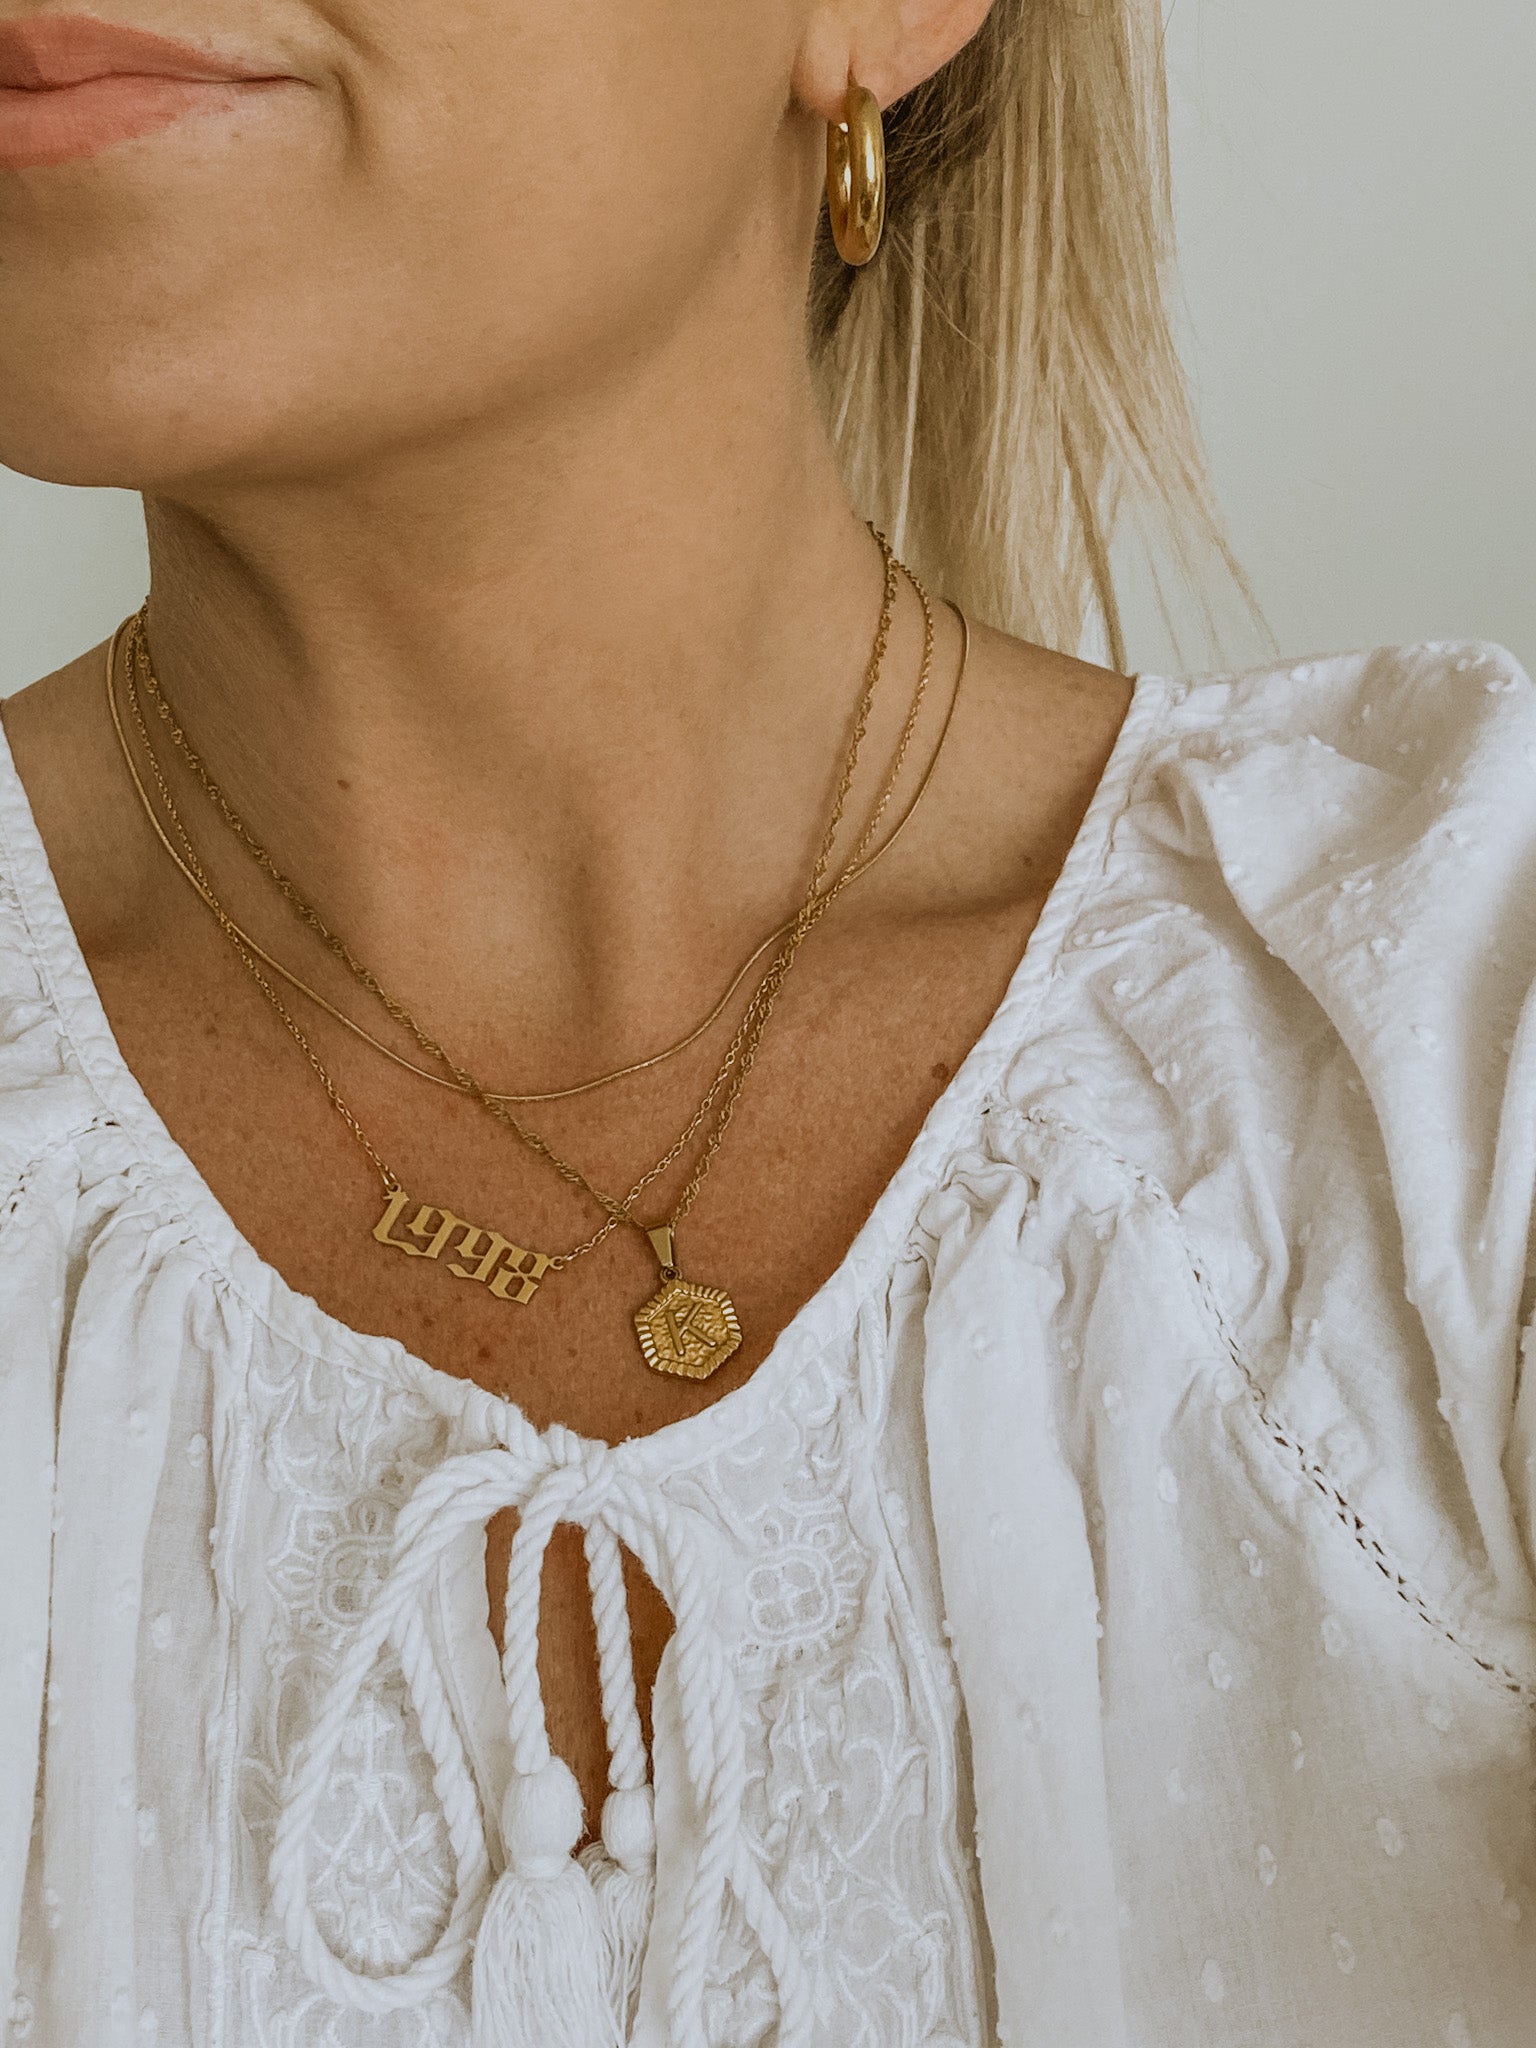 Take Me Back to the 90s (&2000s!) Necklace